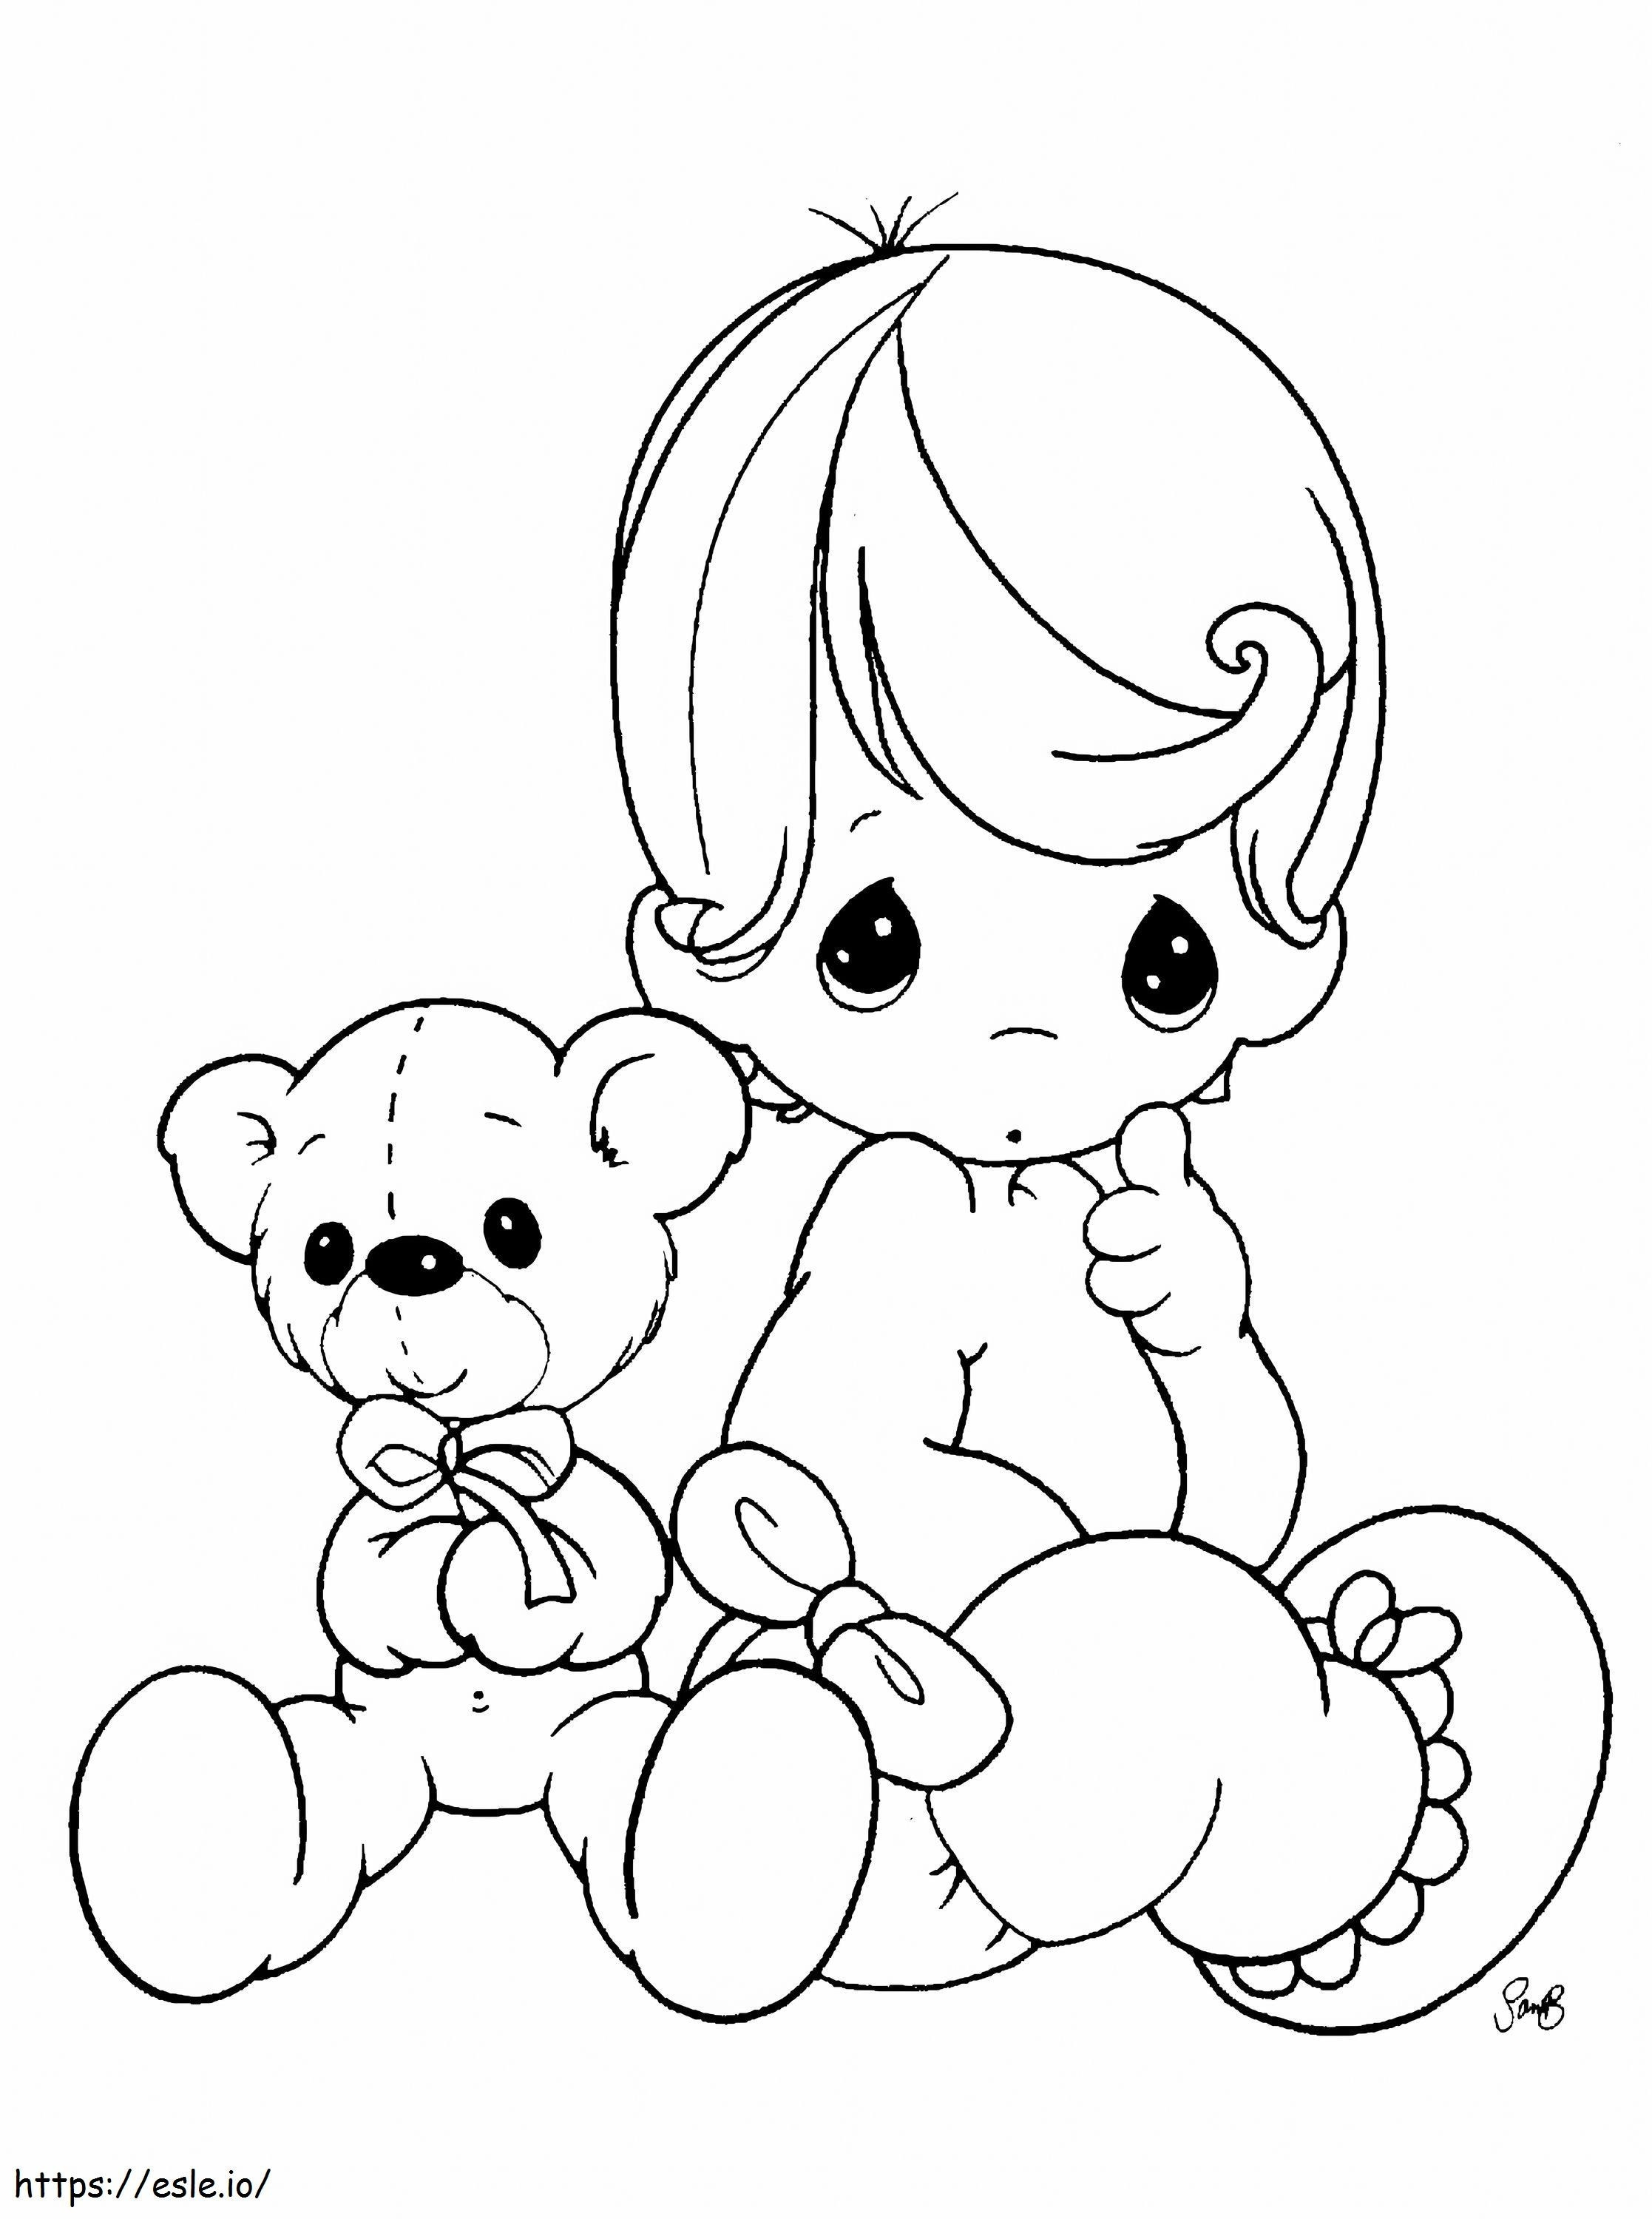 Coloring Extraordinary Precious Moments Picture Inspirations Wallpaper Images Popular 1524X2047 For Phone coloring page